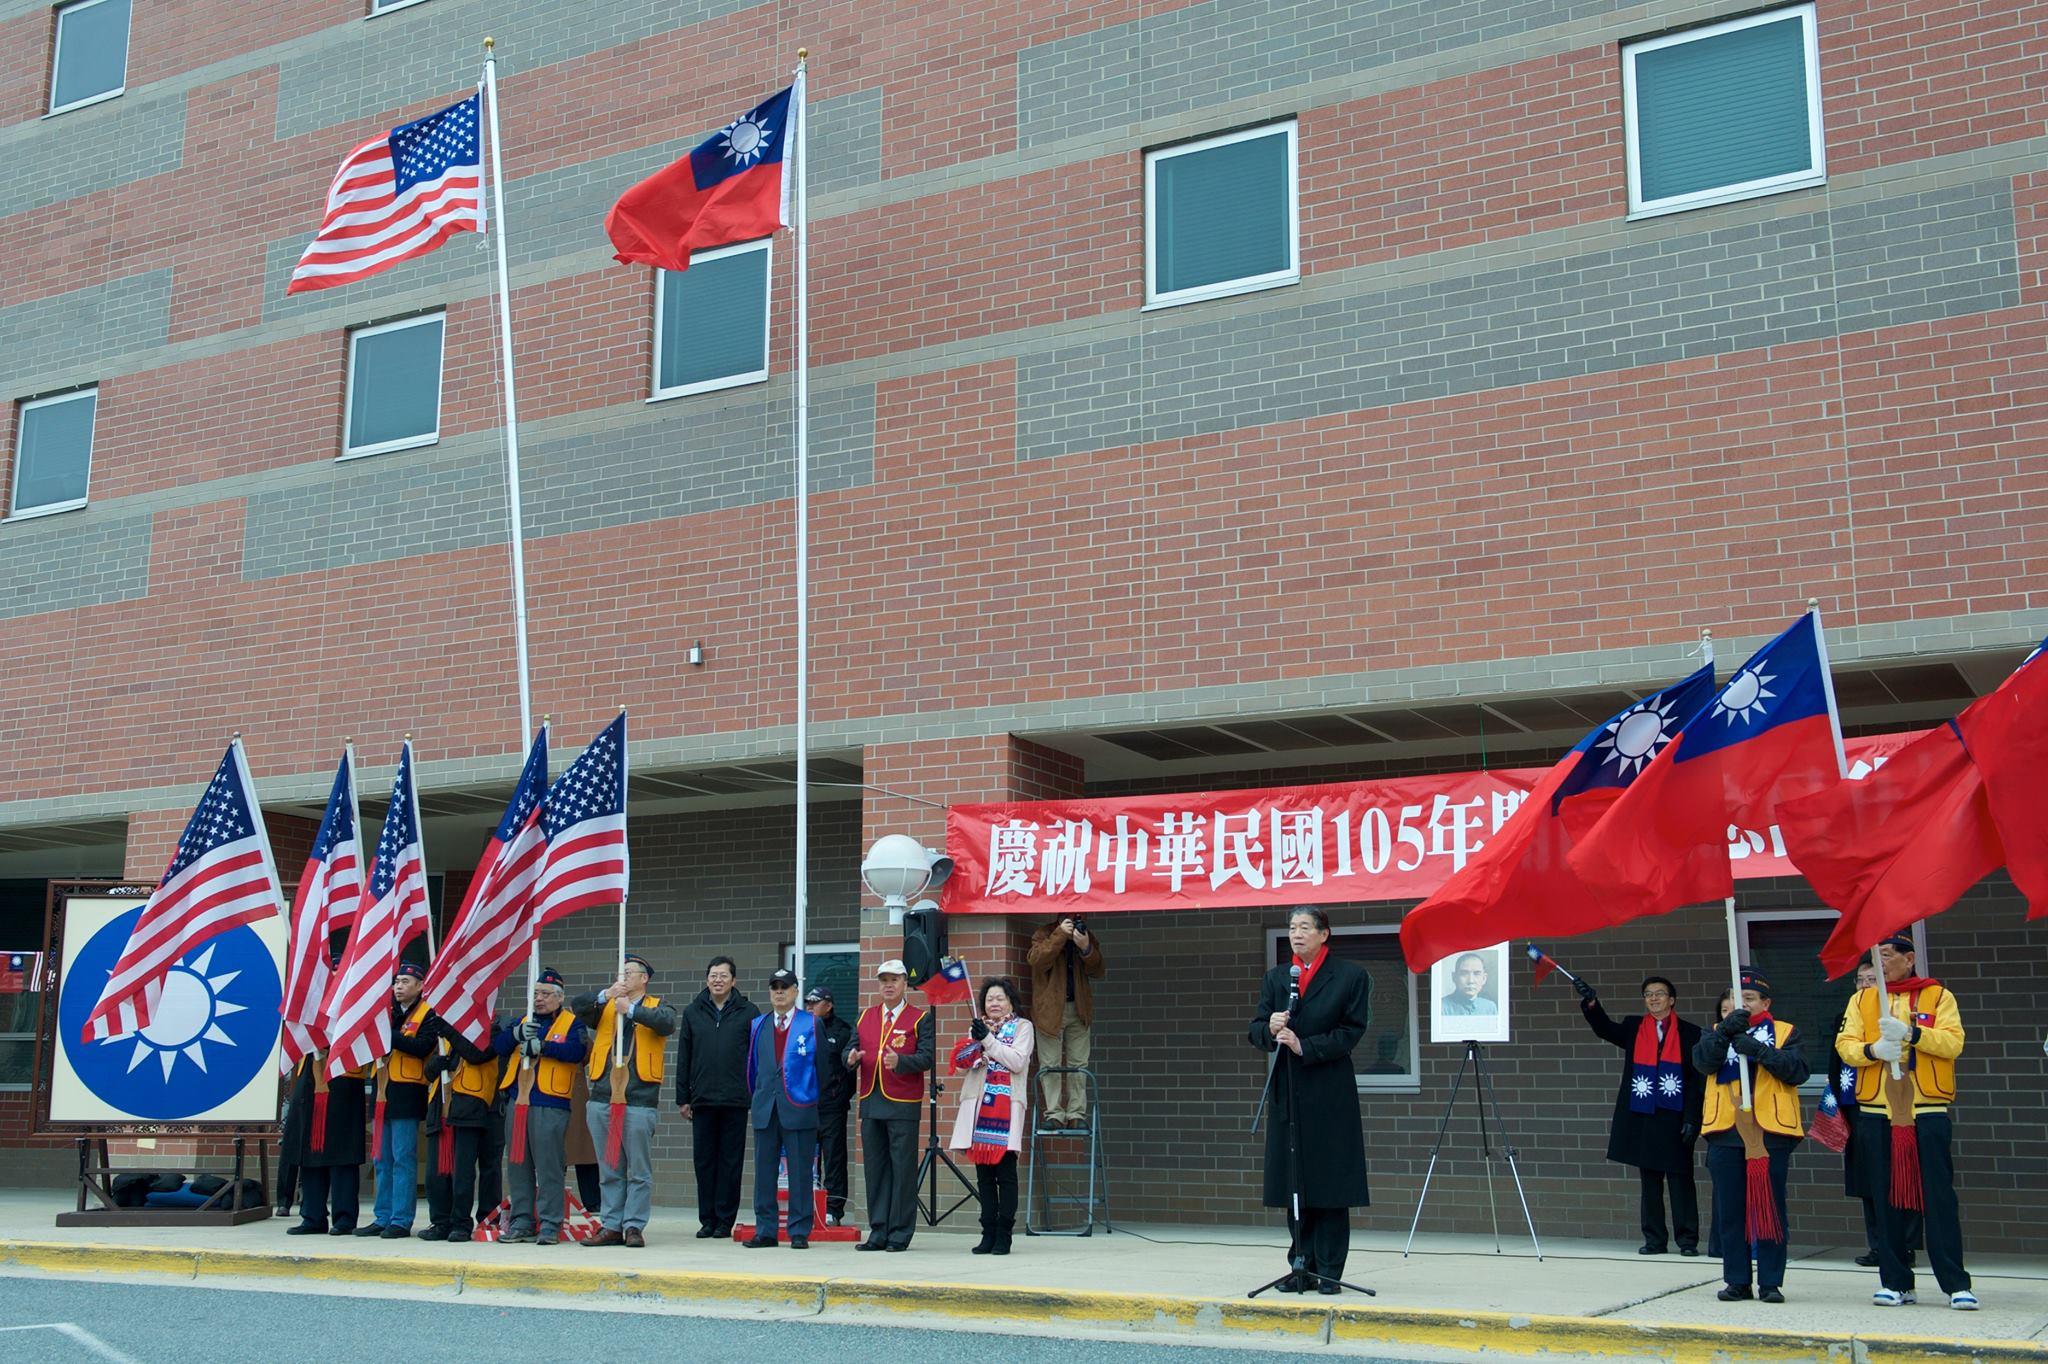 To celebrate the 105th Founding Day of the Republic of China (ROC, Taiwan), the Chinese/Taiwanese communities of the Washington Metropolitan Area held a flag-raising ceremony at the Richard Montgomery High School, Rockville, Maryland, at 10 a.m. on January 1, 2016. In his speech, Representative Lyushun Shen mentioned that, according to the “National Emblem and National Flag of the Republic of China Act,” the emblem is as representative and honorable as the flag of ROC, therefore, a huge ROC national emblem is placed in the ceremony. Representative Shen also alluded to the fact that the 2012 London Olympics was the first time that our nationals could carry the ROC flag into the Olympic compound while cheering on our athletes. Furthermore, our national team was able to carry our national flag while entering the arena of the 2015 World Police and Fire Games held at RFK Stadium in Washington, D.C.. Representative Shen urged our fellow countrymen to protect our national flag, national emblem and our country.